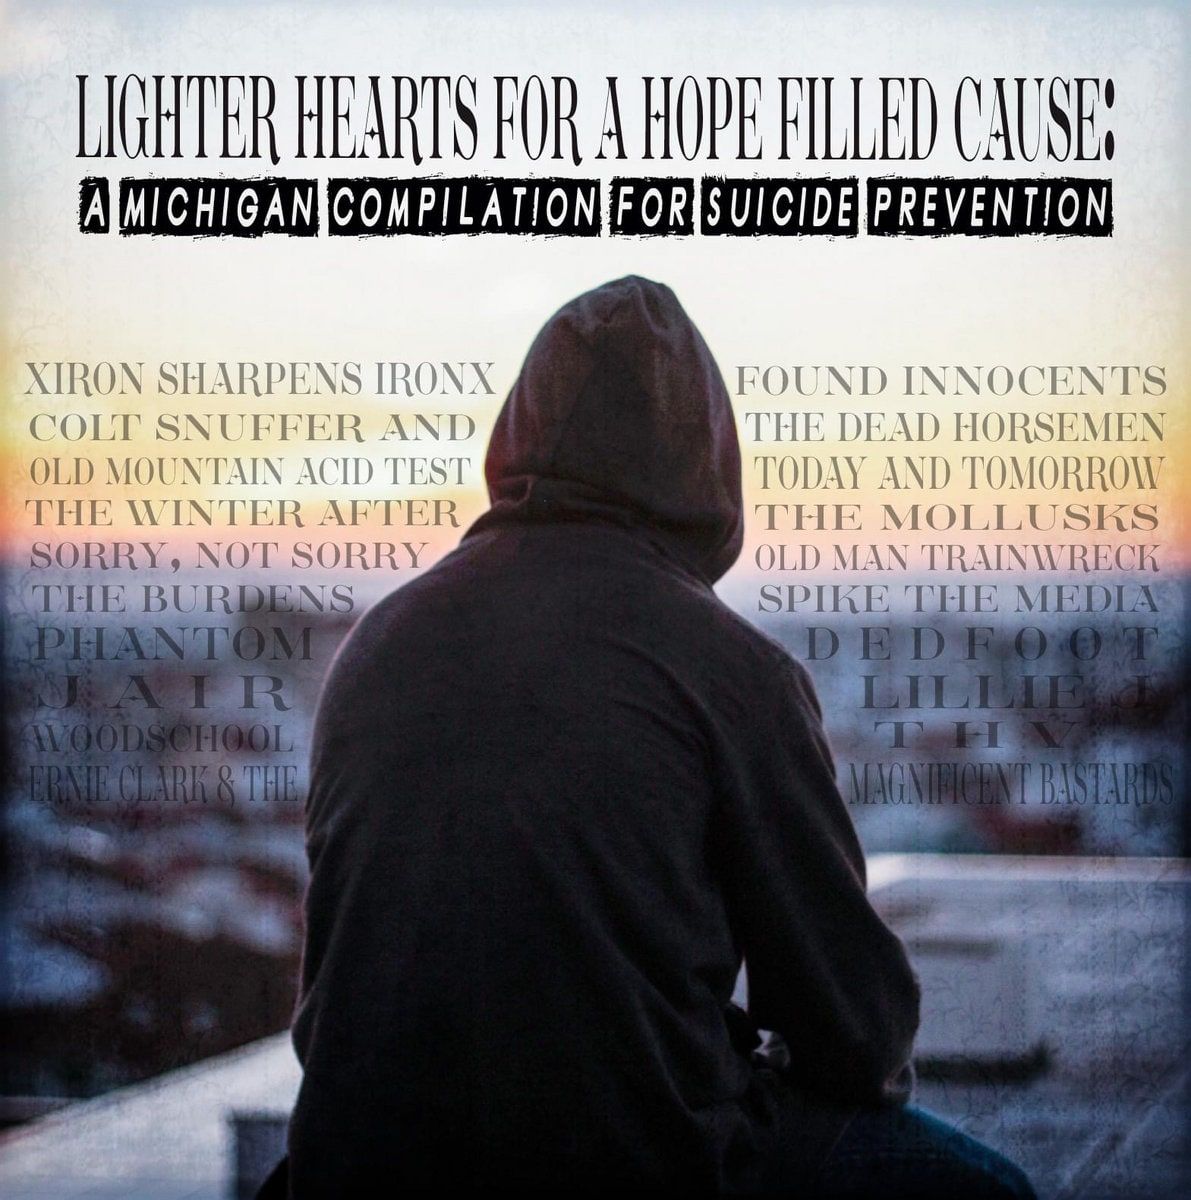 lighter-hearts-for-a-hope-filled-cause-a-michigan-compilation-for-suicide-prevention